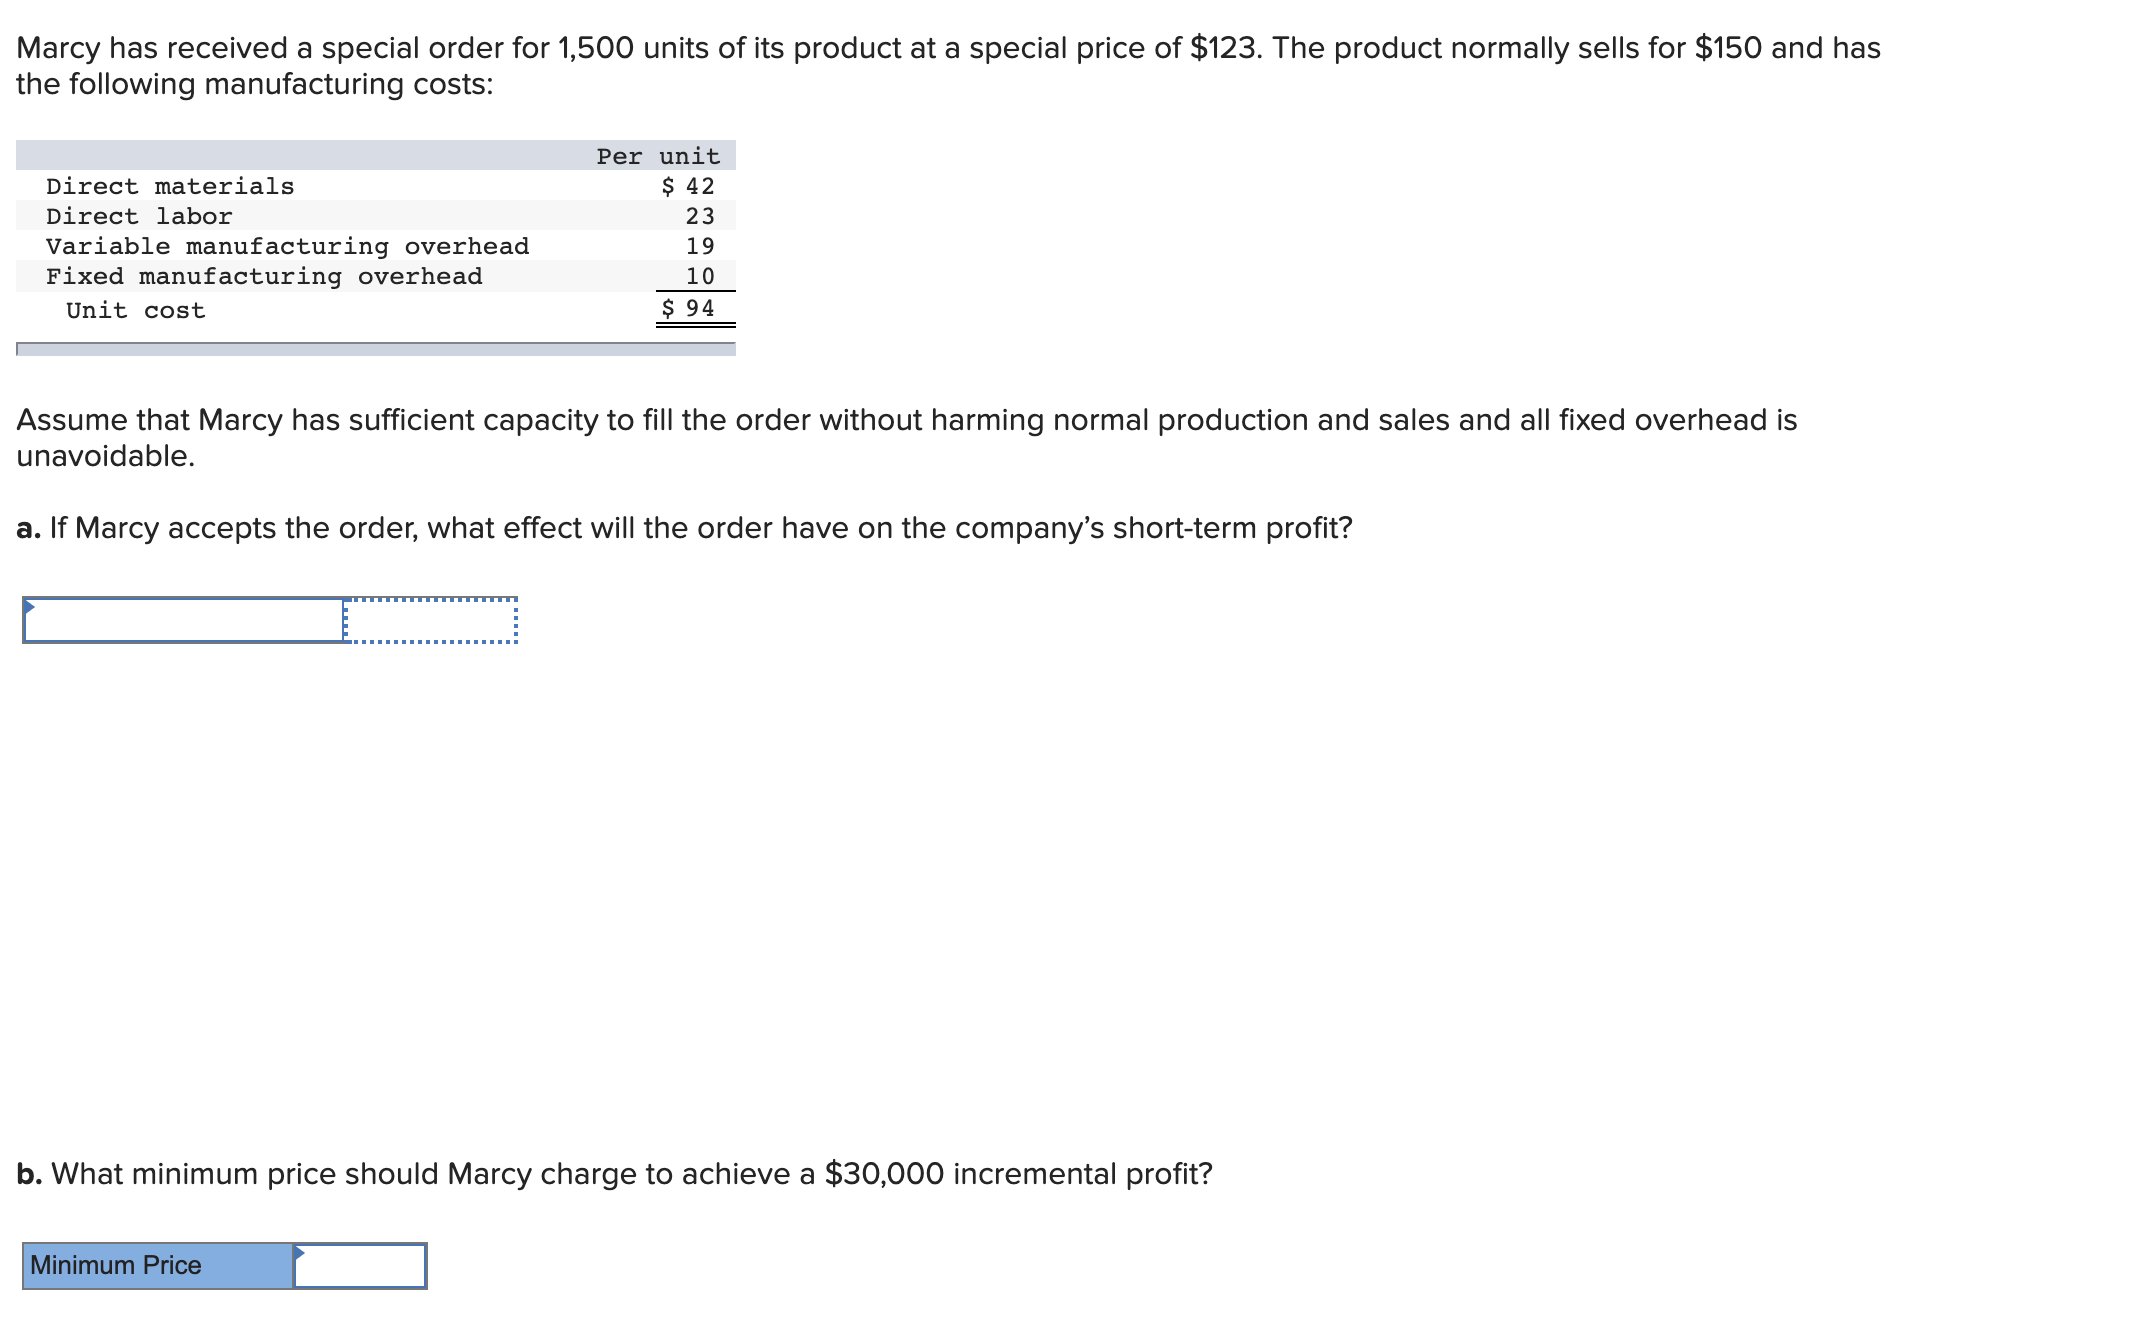 Marcy has received a special order for 1,500 units of its product at a special price of $123. The product normally sells for $150 and has
the following manufacturing costs:
Per unit
Direct materials
$ 42
Direct labor
23
Variable manufacturing overhead
Fixed manufacturing overhead
19
10
Unit cost
$ 94
Assume that Marcy has sufficient capacity to fill the order without harming normal production and sales and all fixed overhead is
unavoidable.
a. If Marcy accepts the order, what effect will the order have on the company's short-term profit?
b. What minimum price should Marcy charge to achieve a $30,000 incremental profit?
Minimum Price
